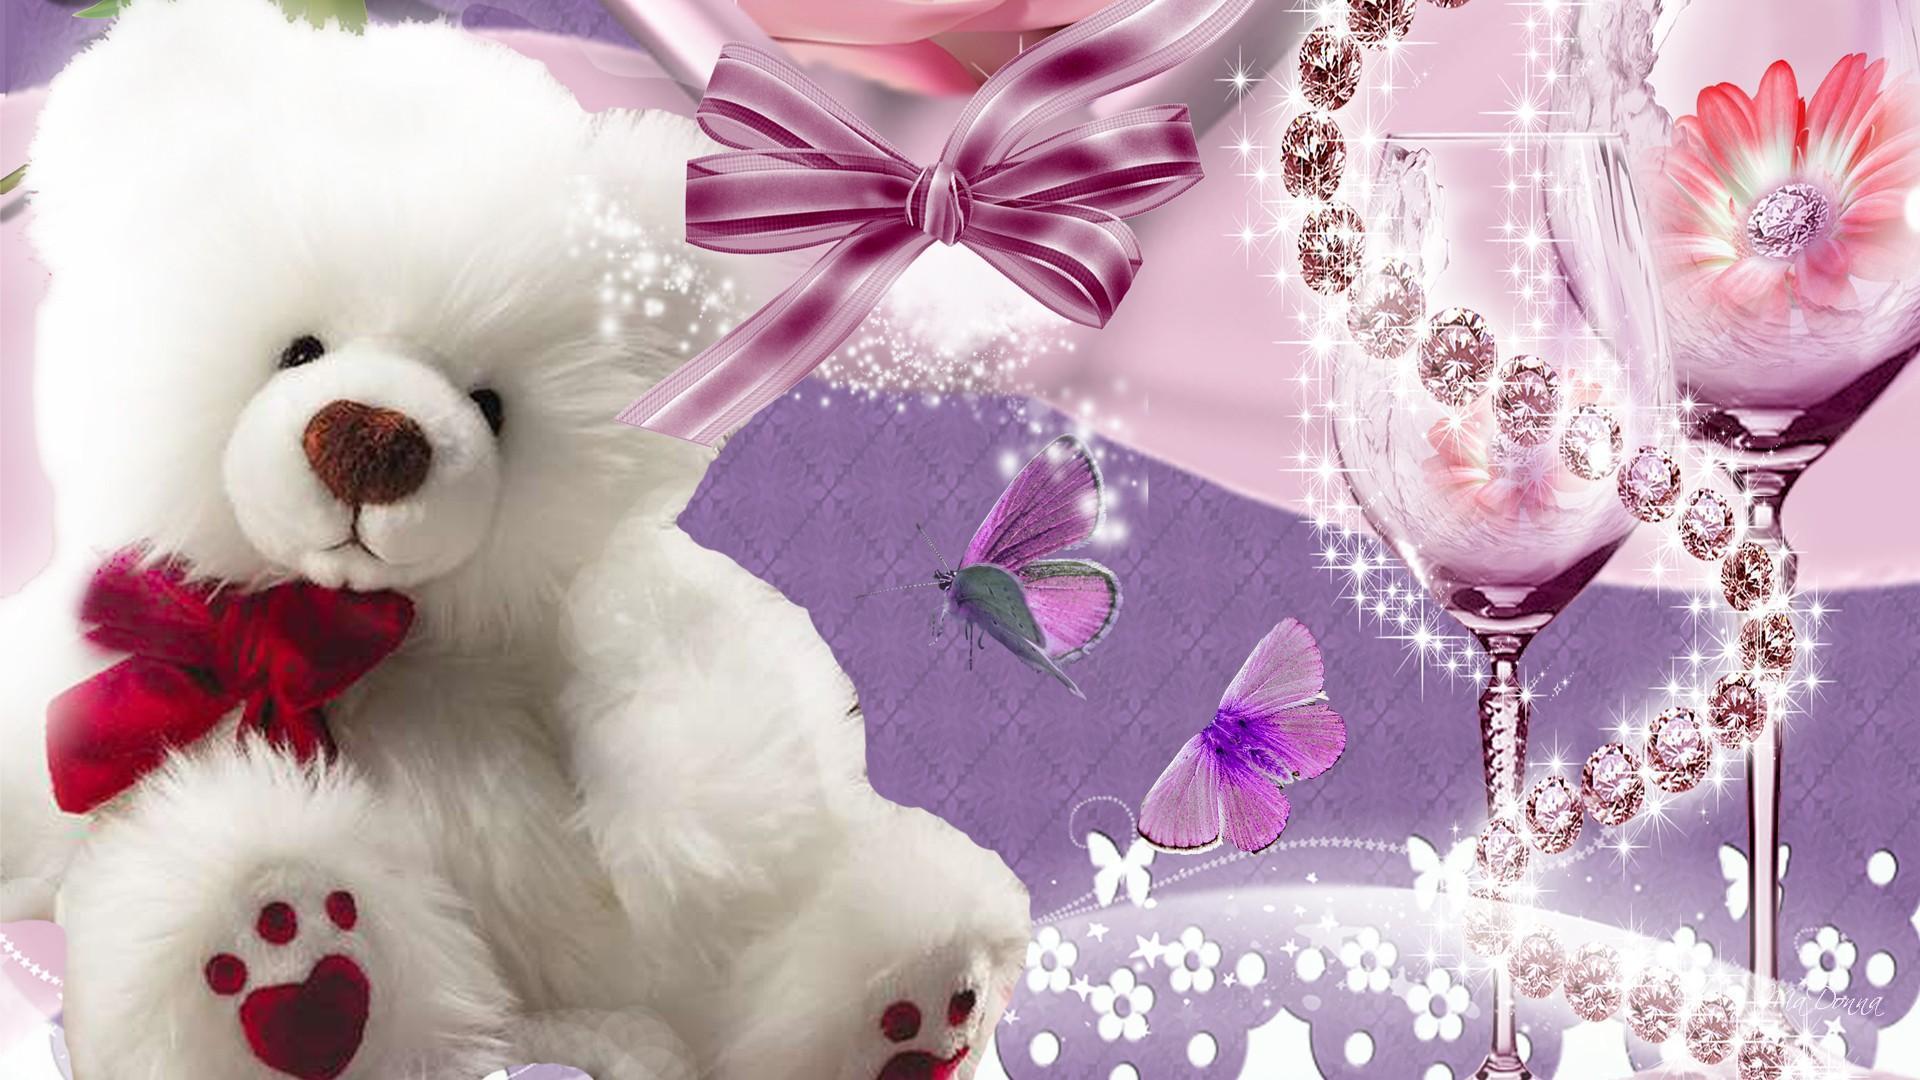 Teddy Day Image for Whatsapp DP, Profile Wallpaper